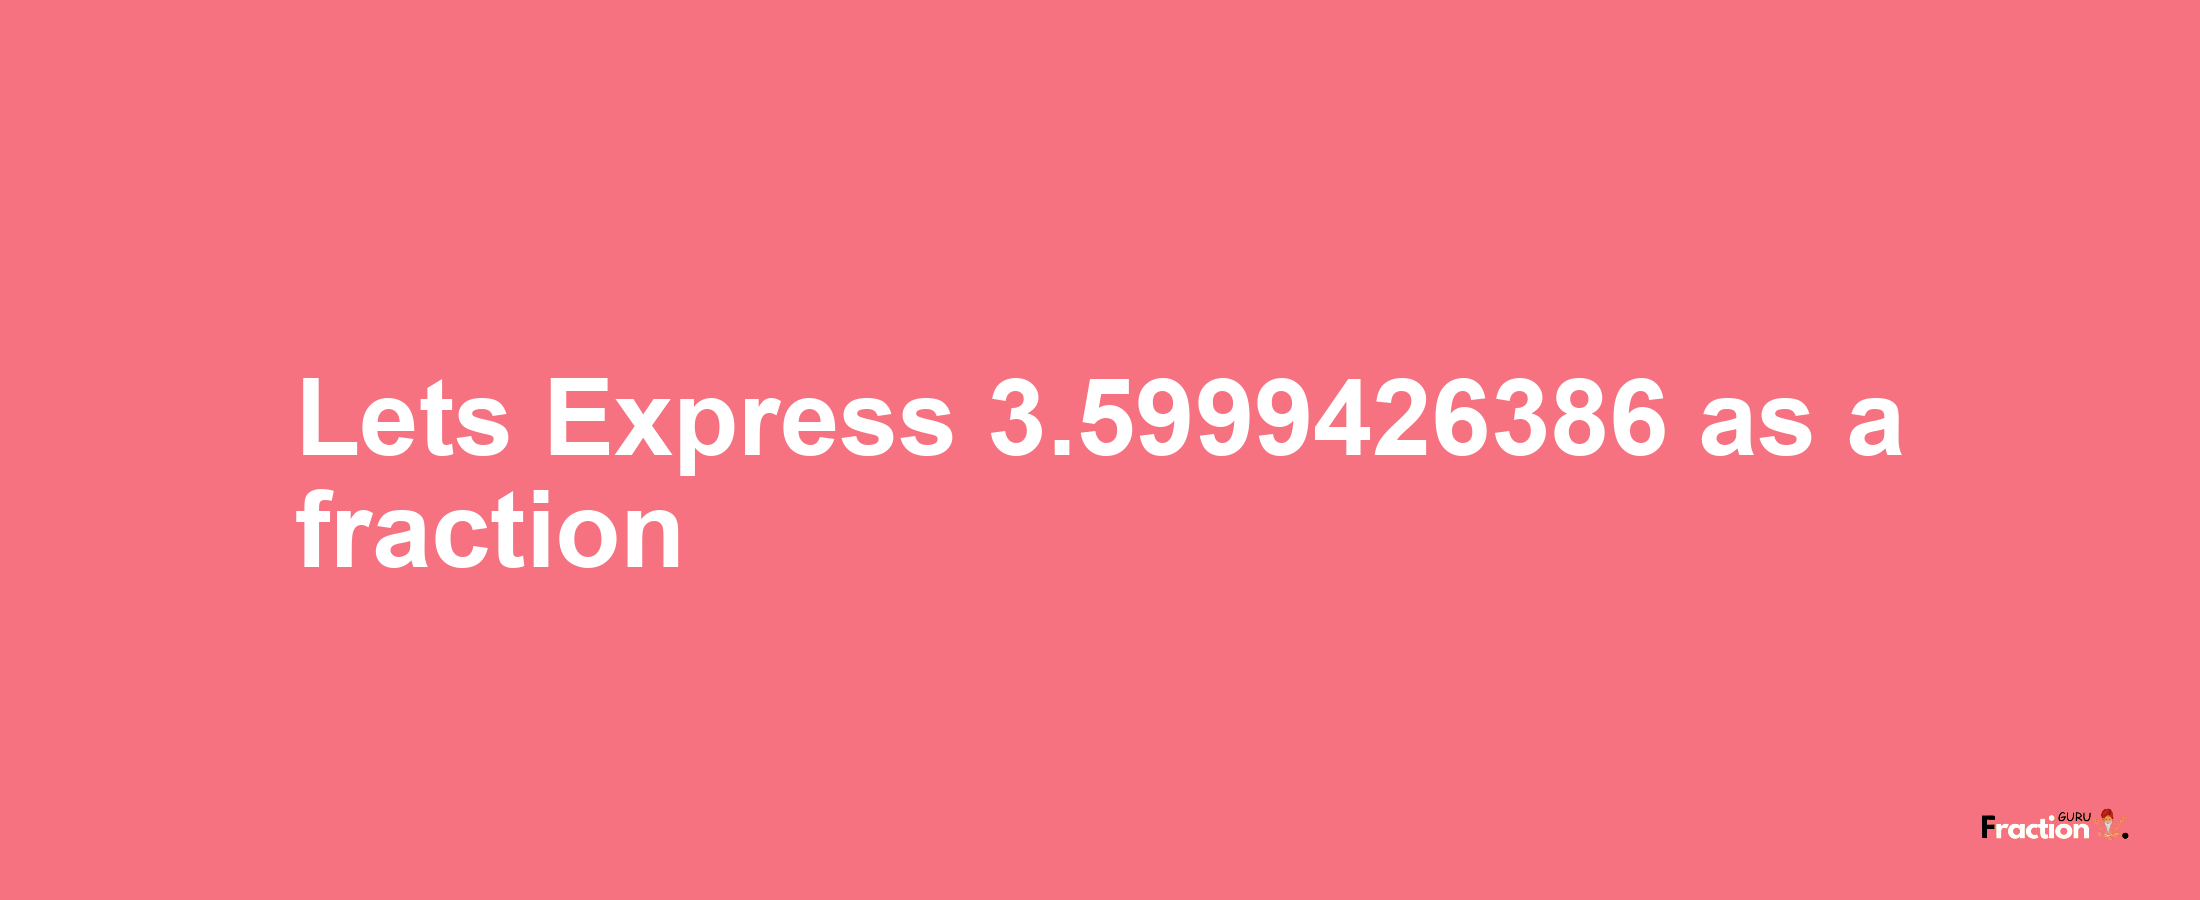 Lets Express 3.5999426386 as afraction